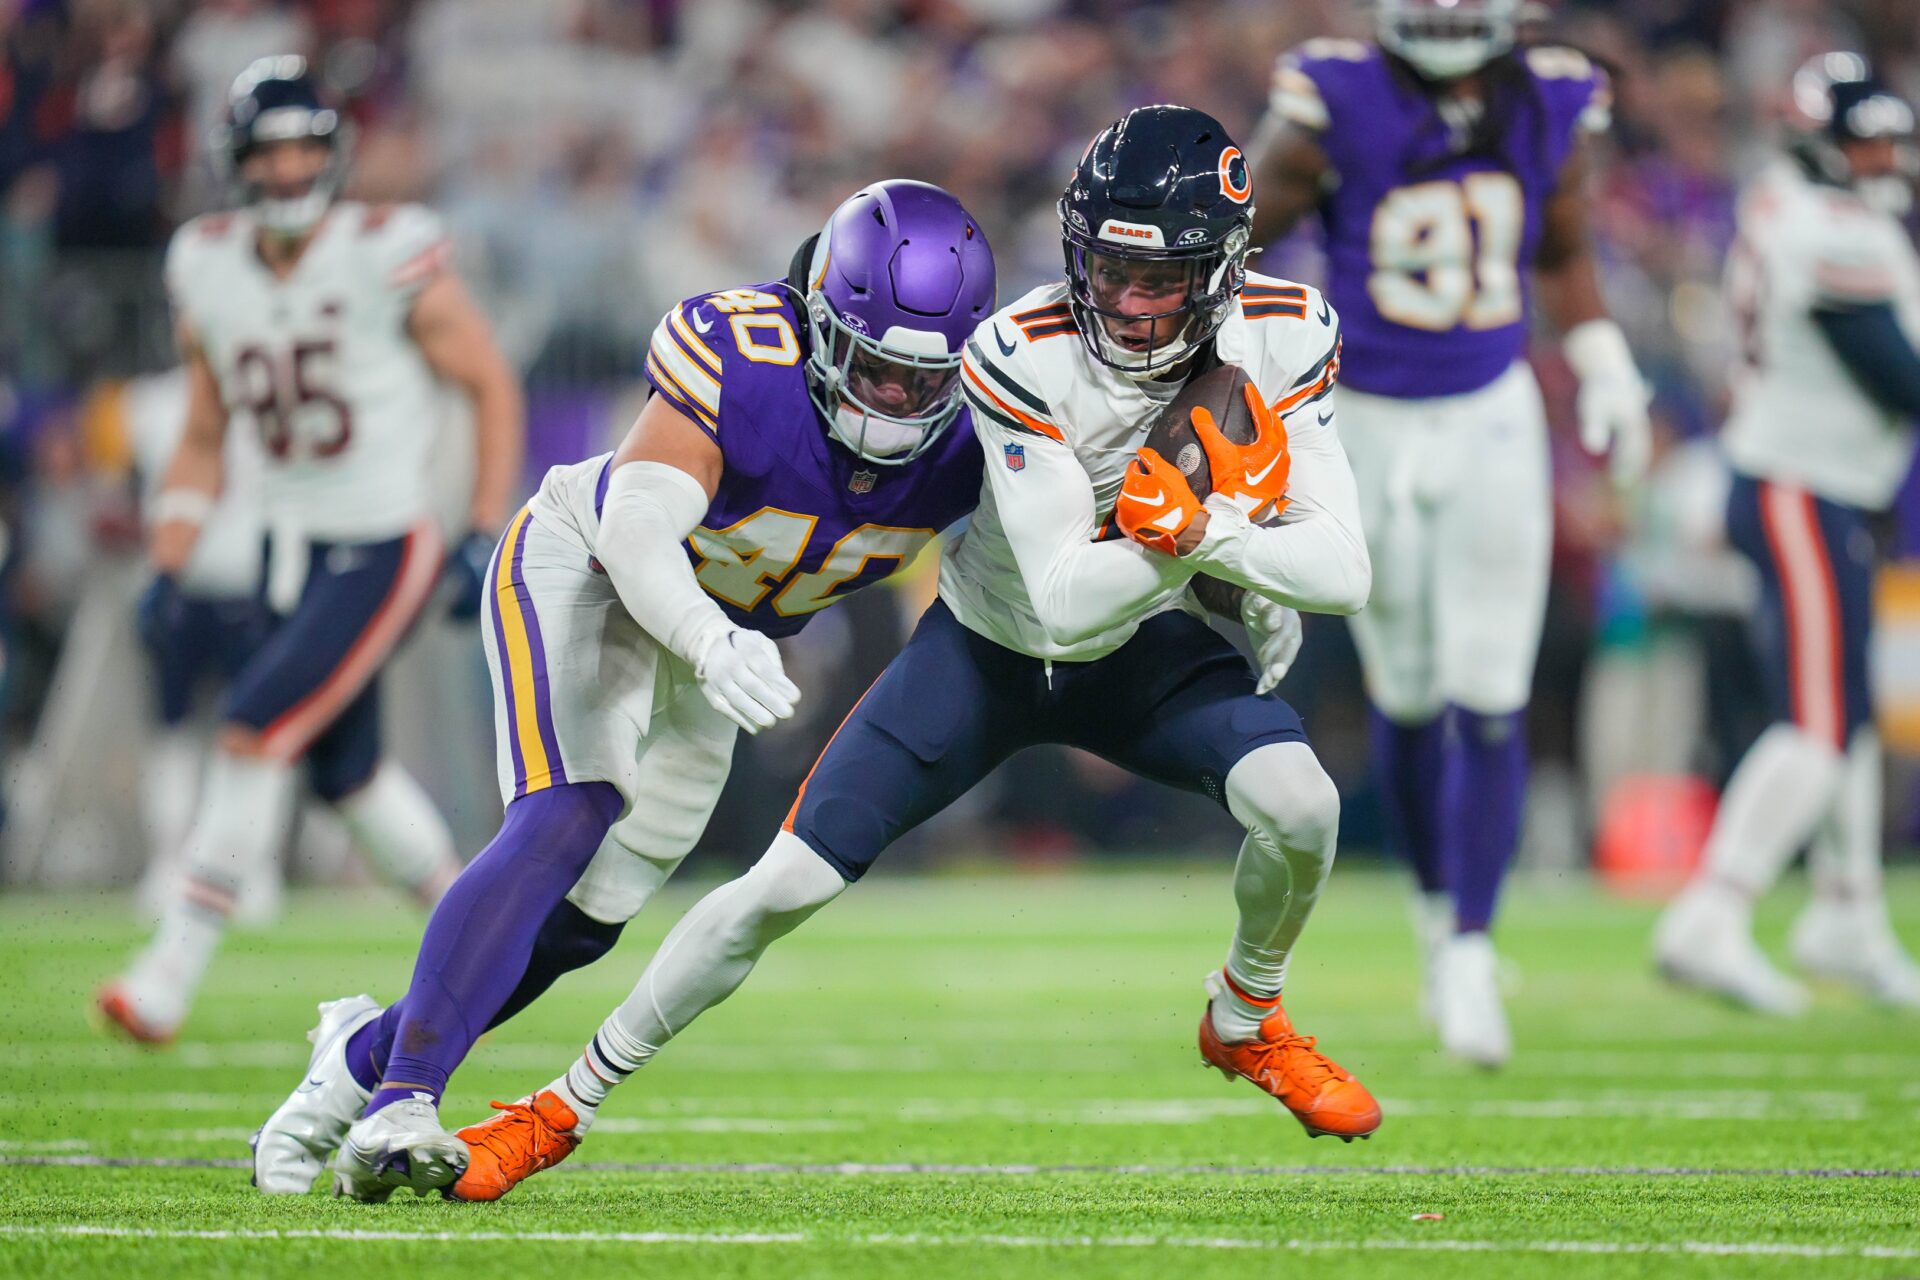 Chicago Bears wide receiver Darnell Mooney (11) runs after the catch against the Minnesota Vikings linebacker Ivan Pace Jr. (40) in the fourth quarter at U.S. Bank Stadium.